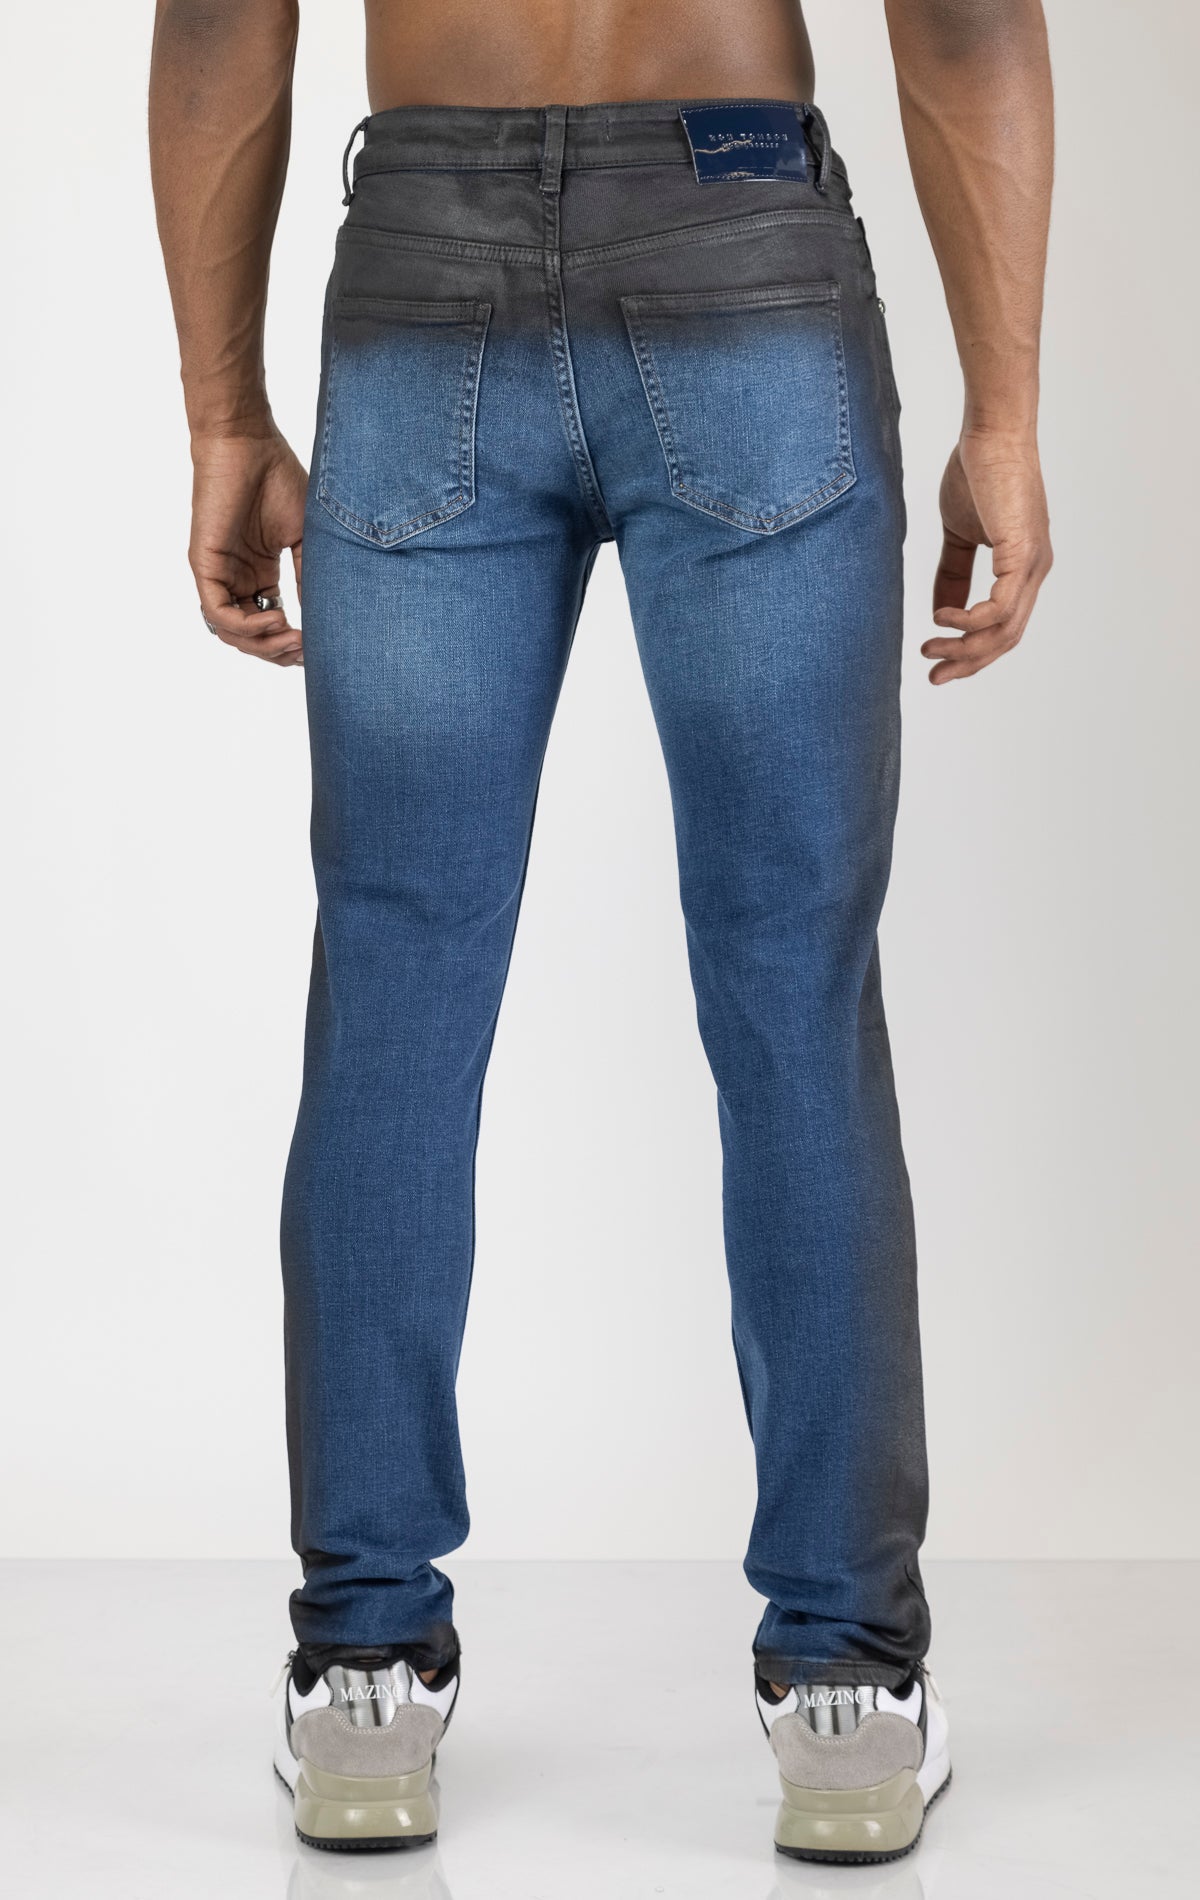 Men's side waxed tapered jeans in blue. The jeans are made from premium quality denim (98% cotton, 2% lycra) and feature a tailored fit, meticulously applied waxed detailing along the side seams, and a tapered leg.